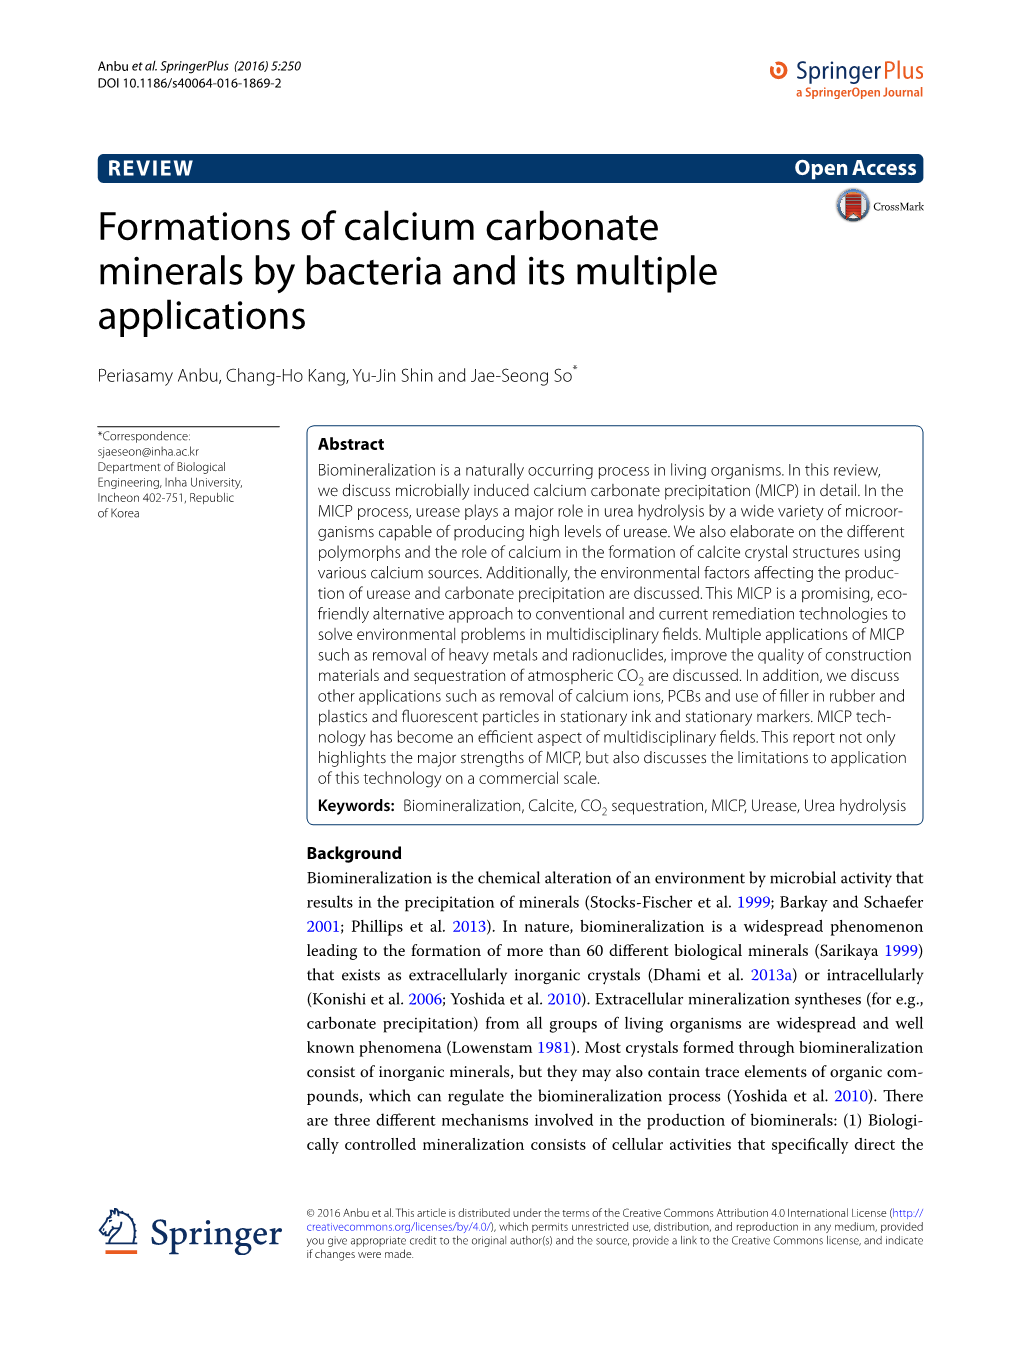 Formations of Calcium Carbonate Minerals by Bacteria and Its Multiple Applications